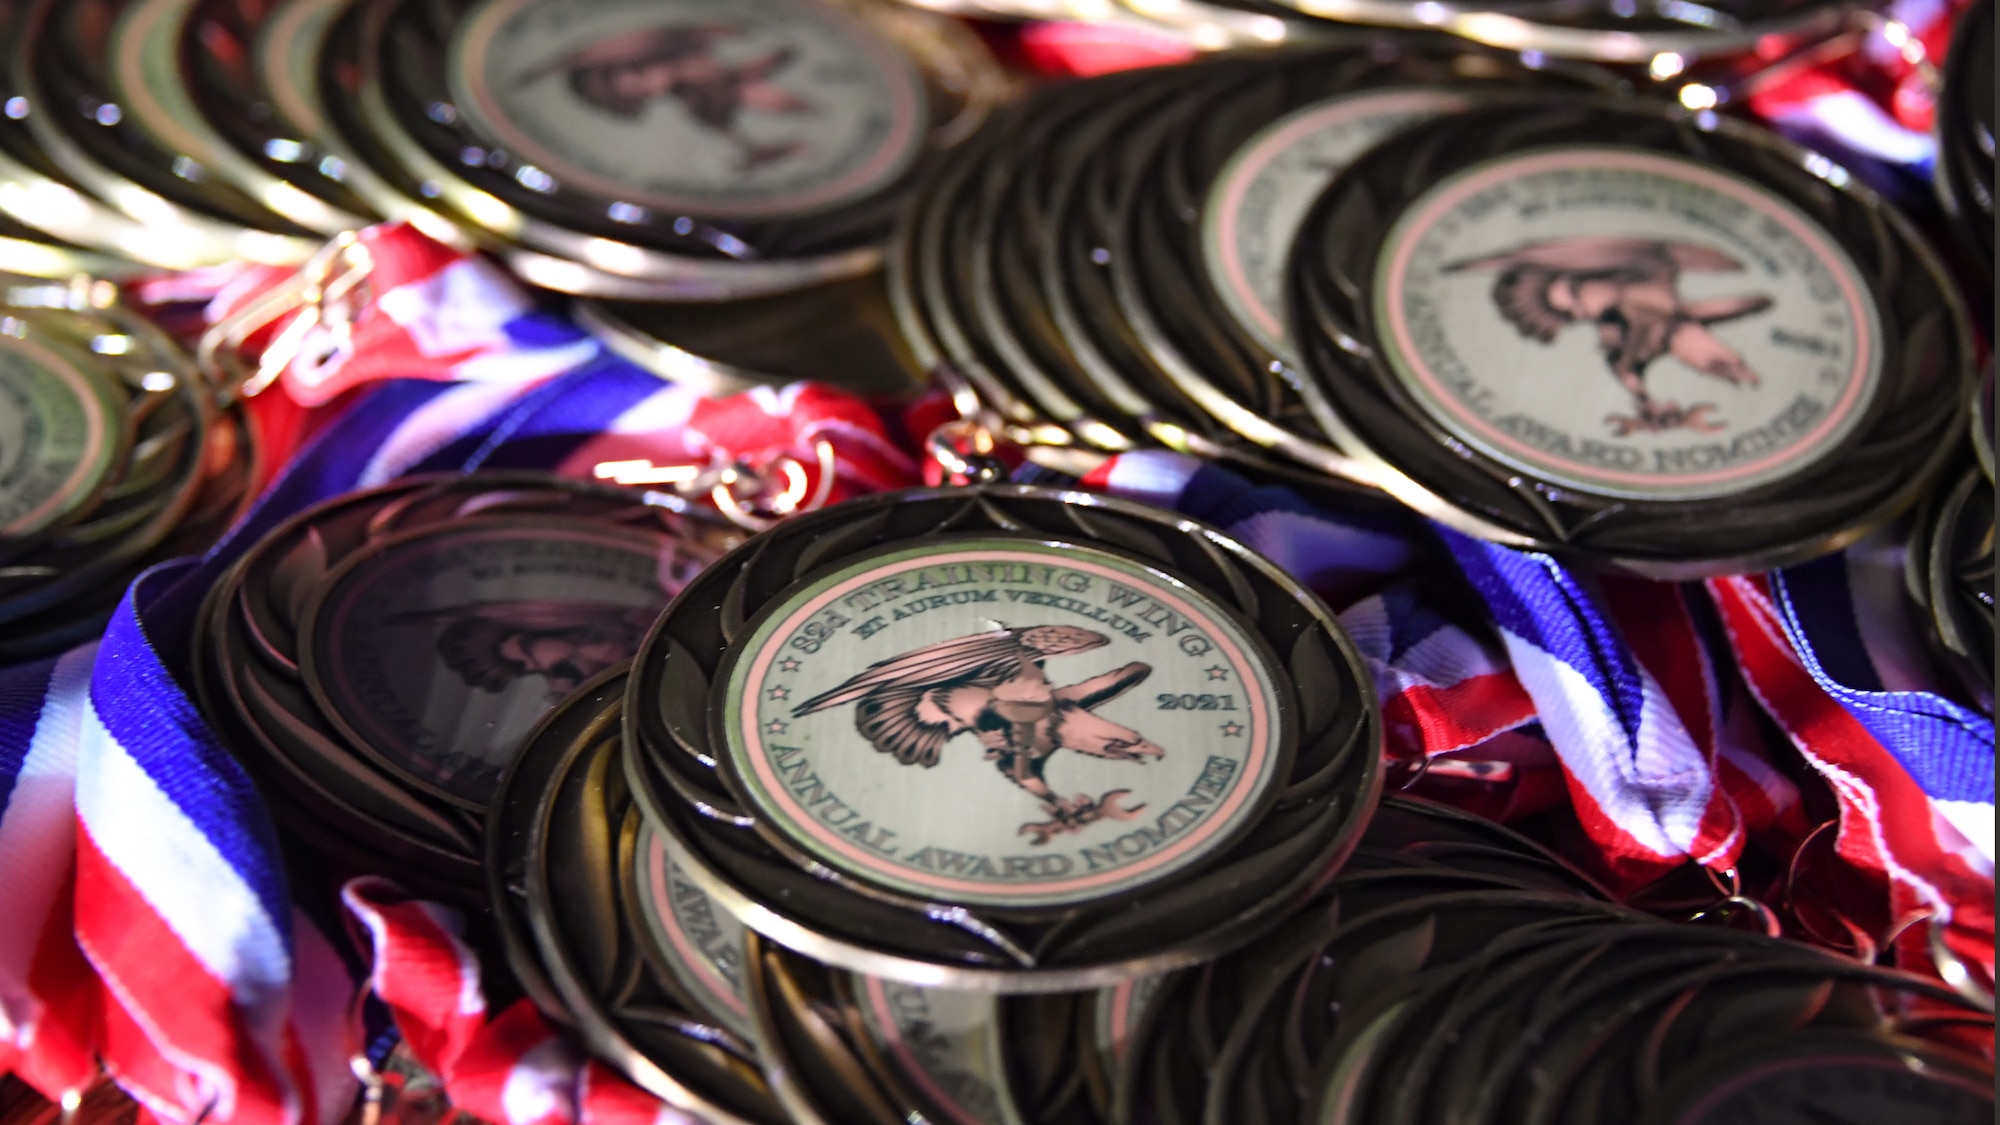 82nd Training Wing Annual Award Nominee medallions